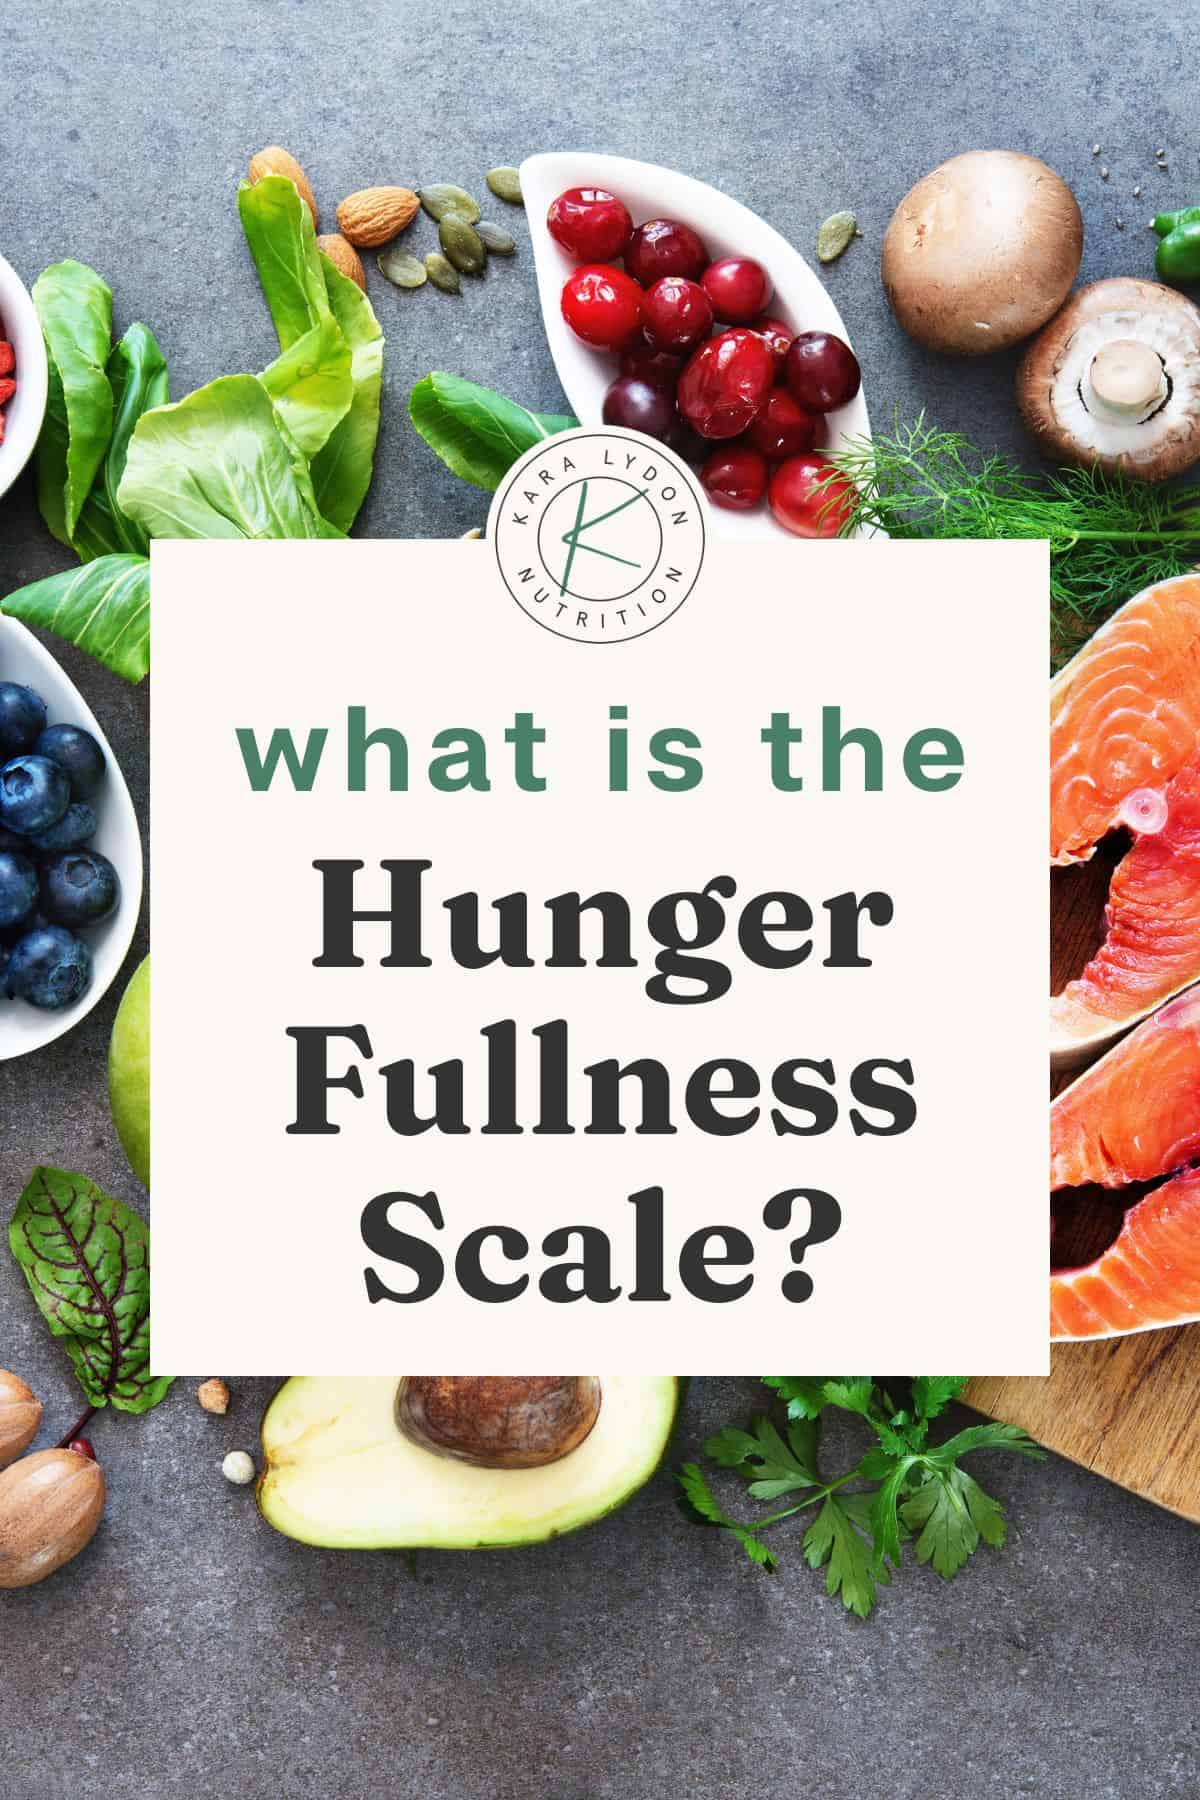 image of various food items on gray surface with text overlay what is the hunger fullness scale?